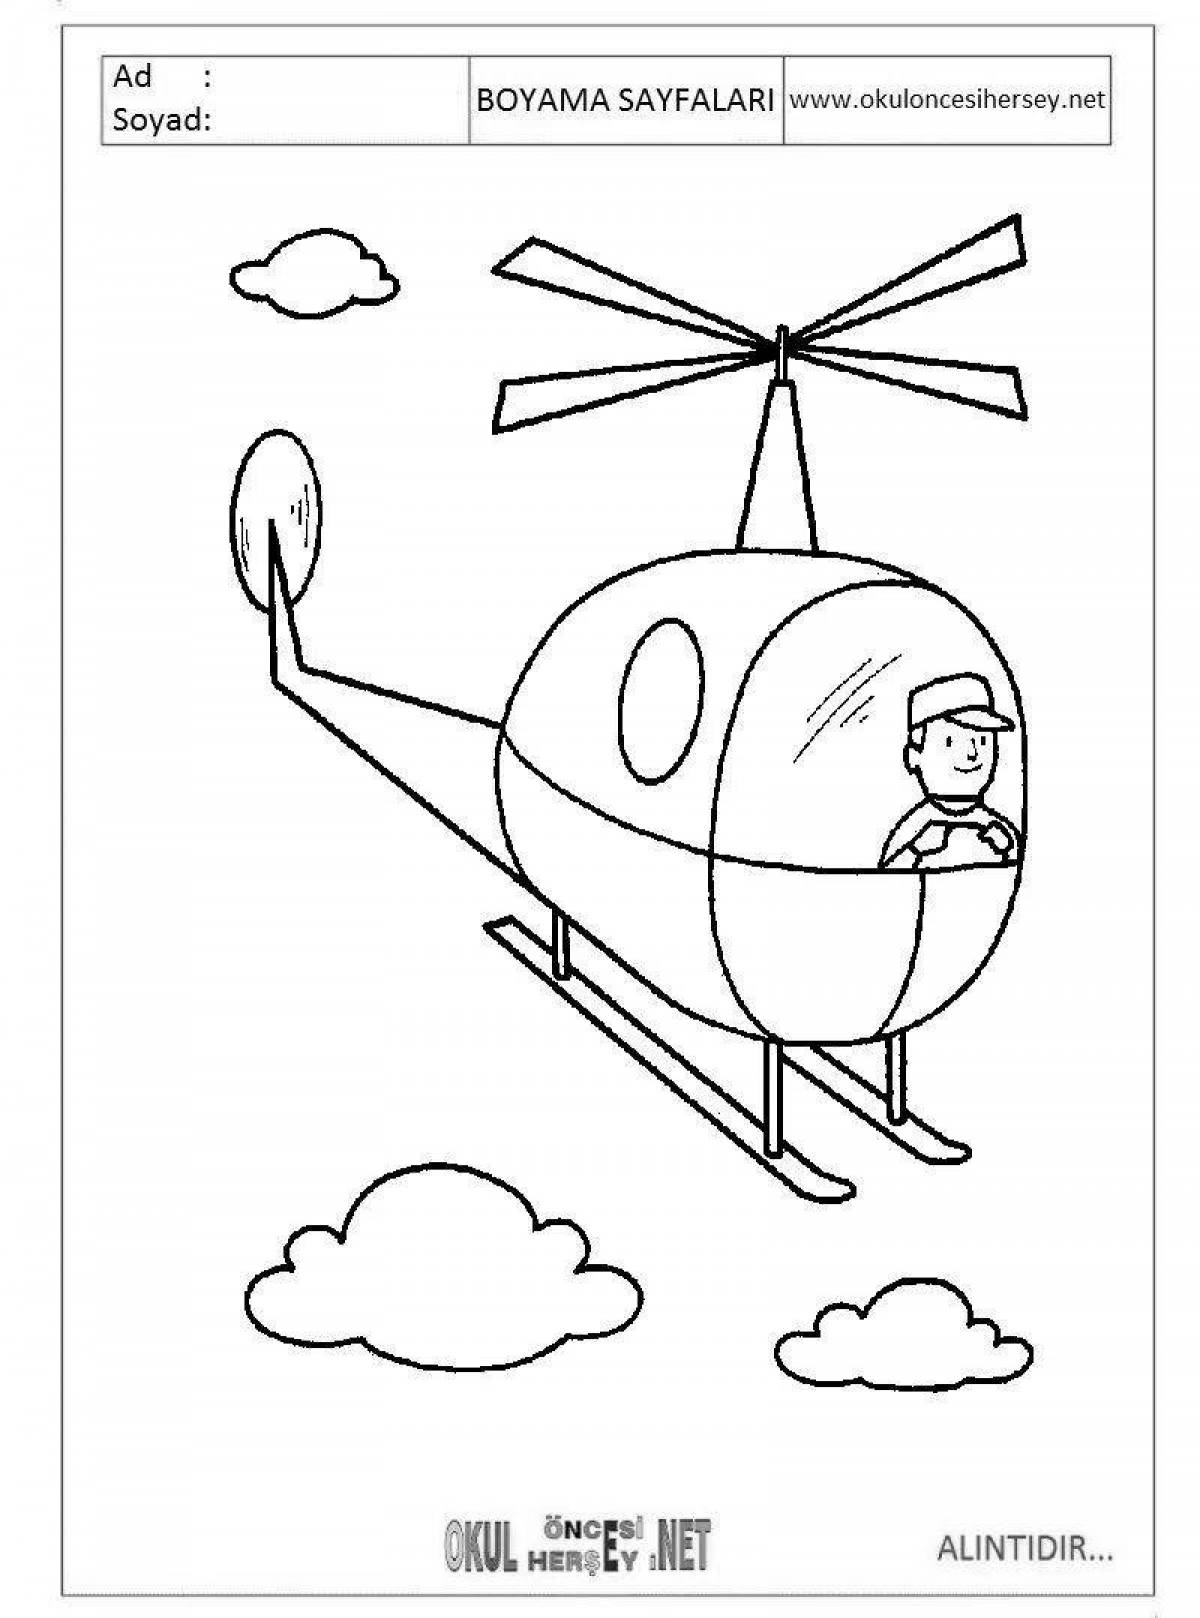 Wonderful air transport coloring book for 6-7 year olds